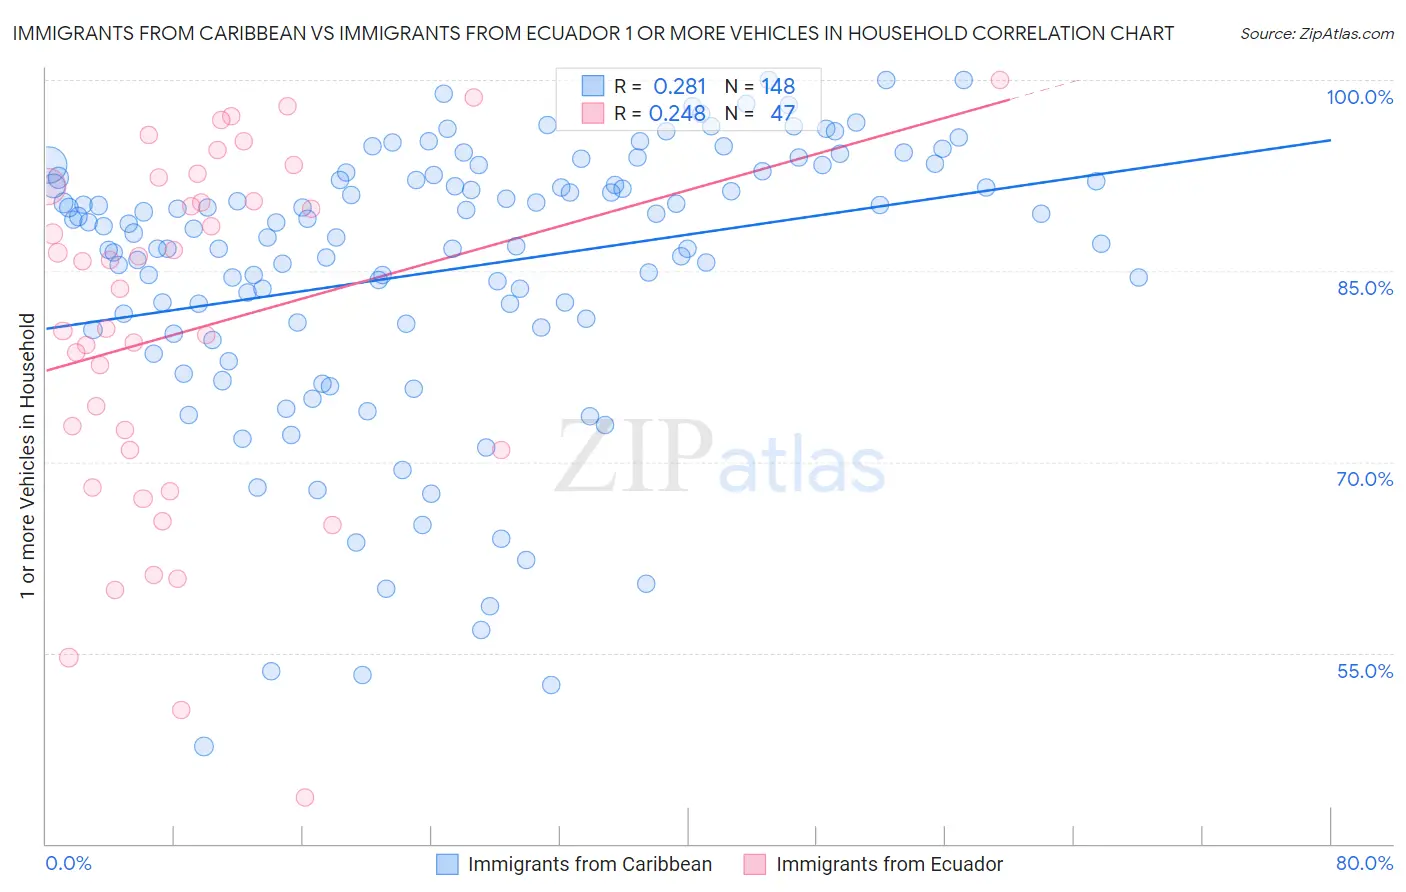 Immigrants from Caribbean vs Immigrants from Ecuador 1 or more Vehicles in Household